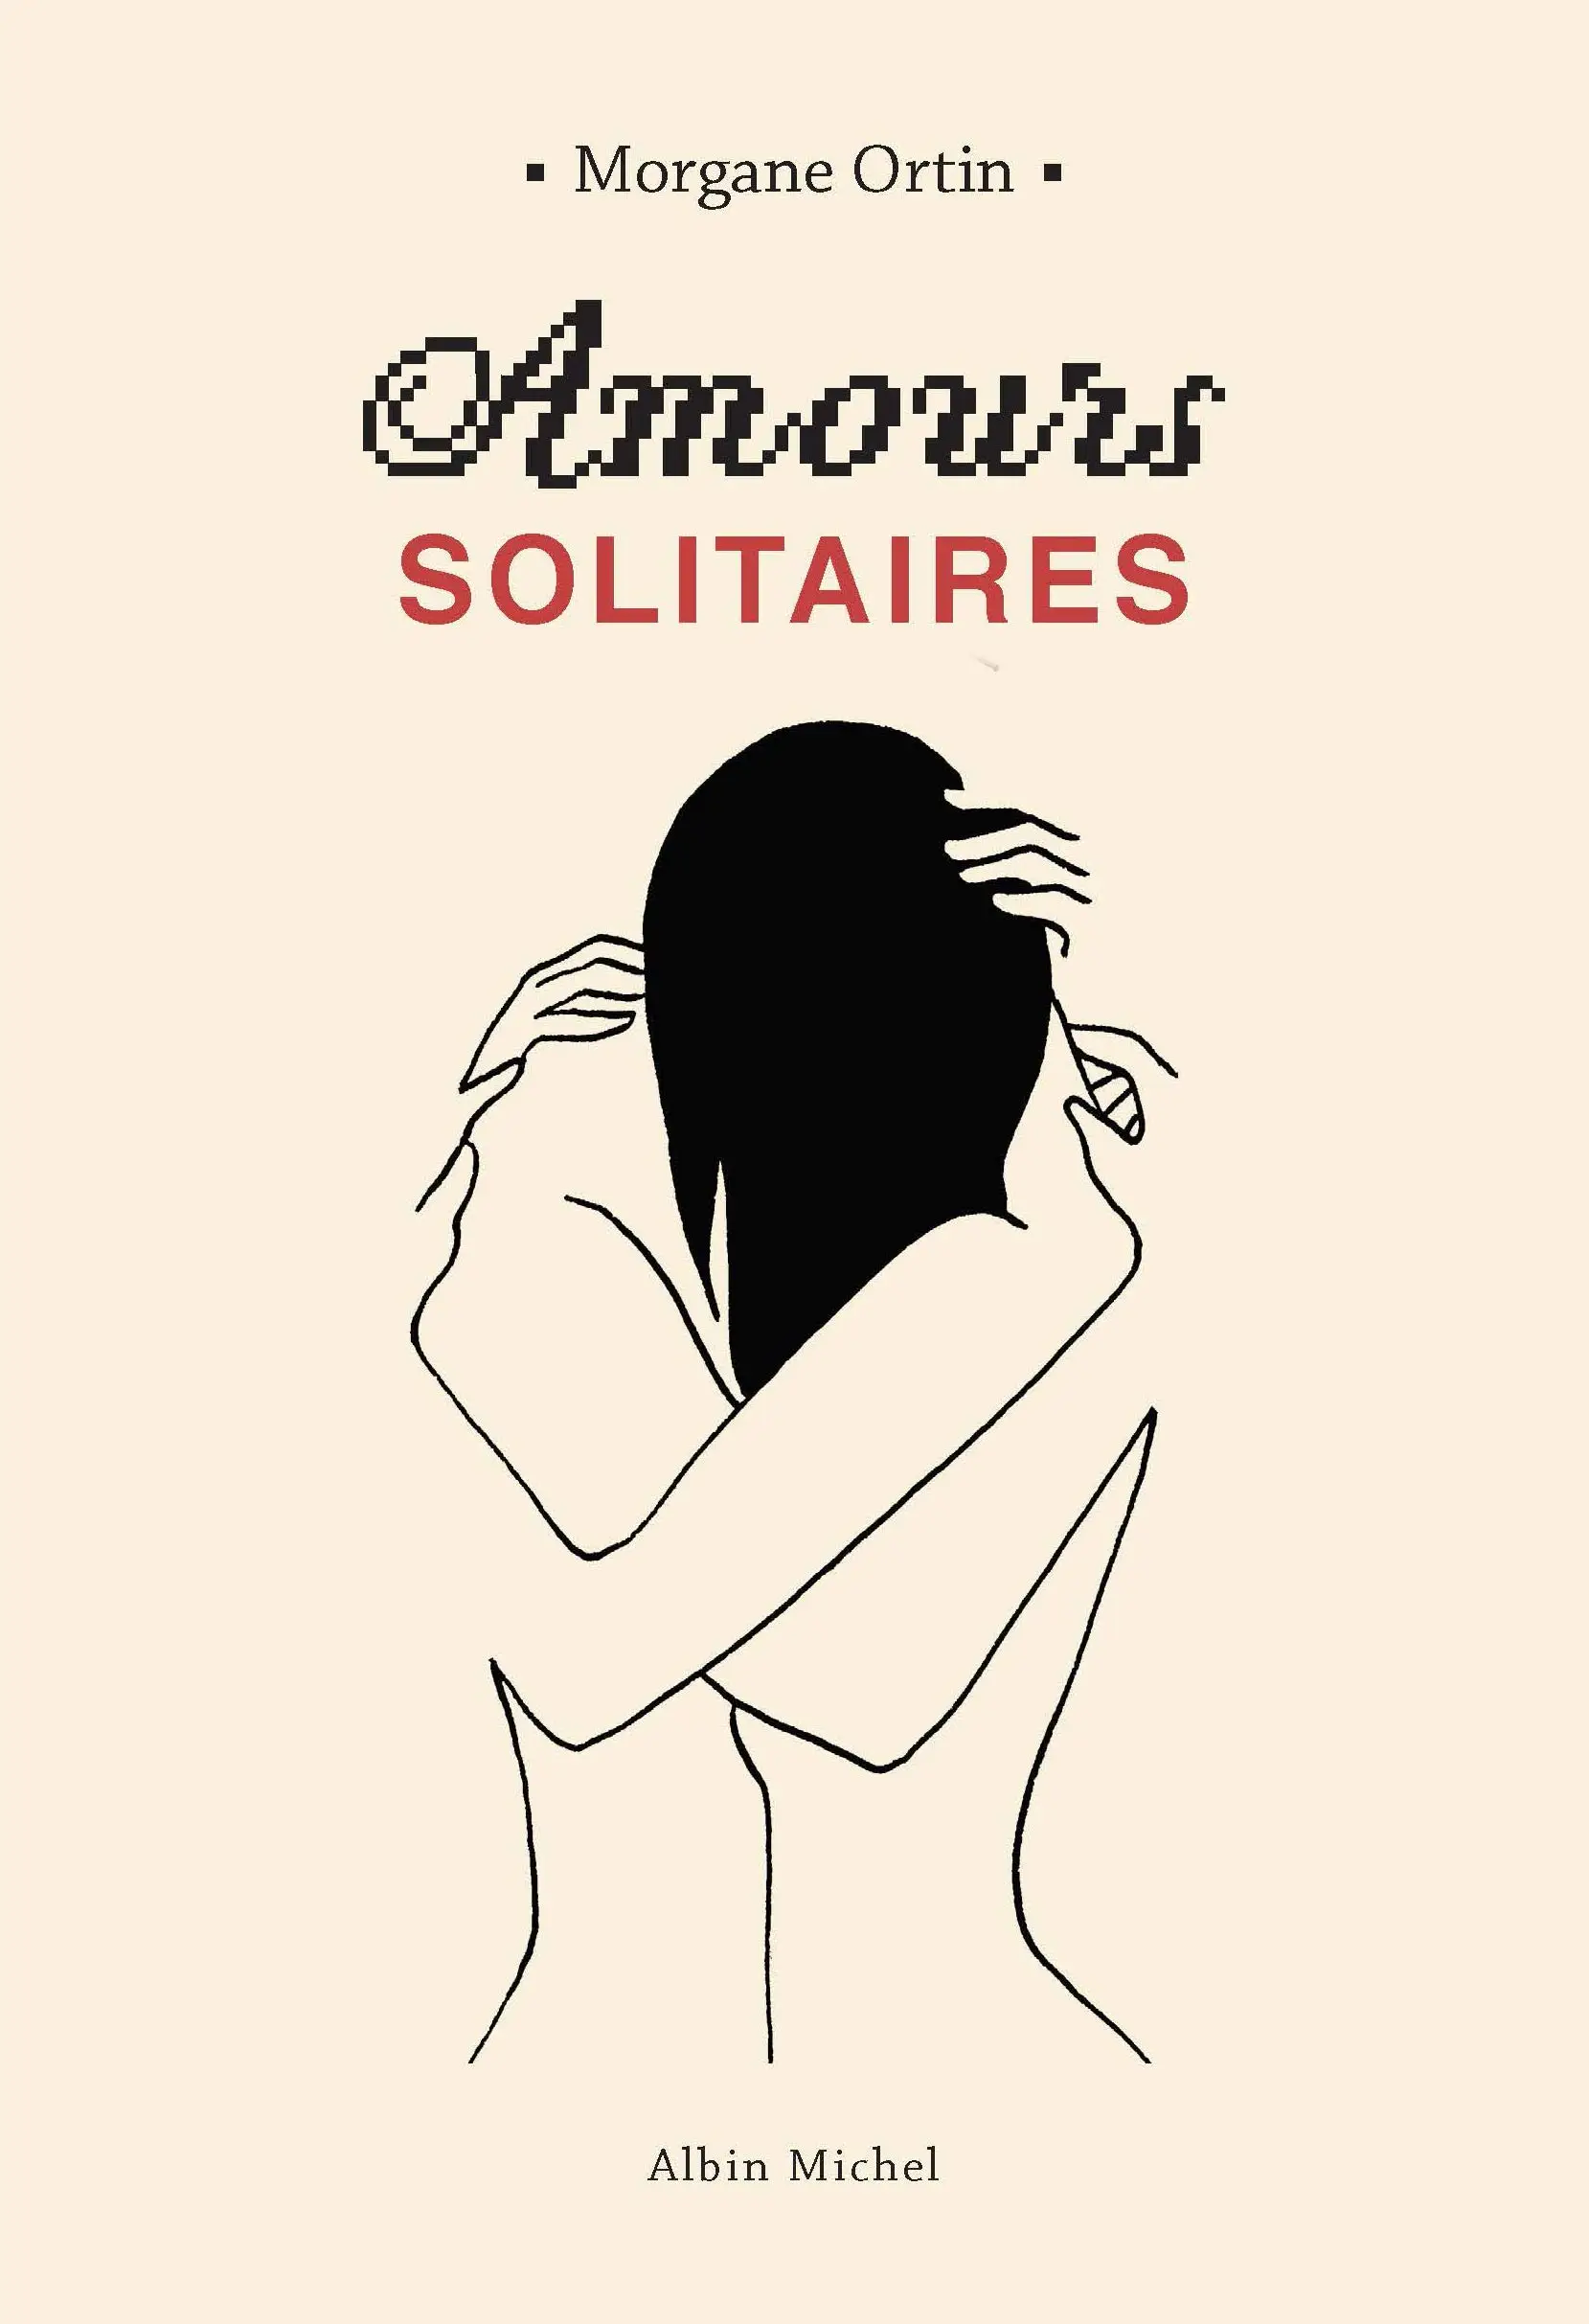 Amours solitaires - Morgane Ortin